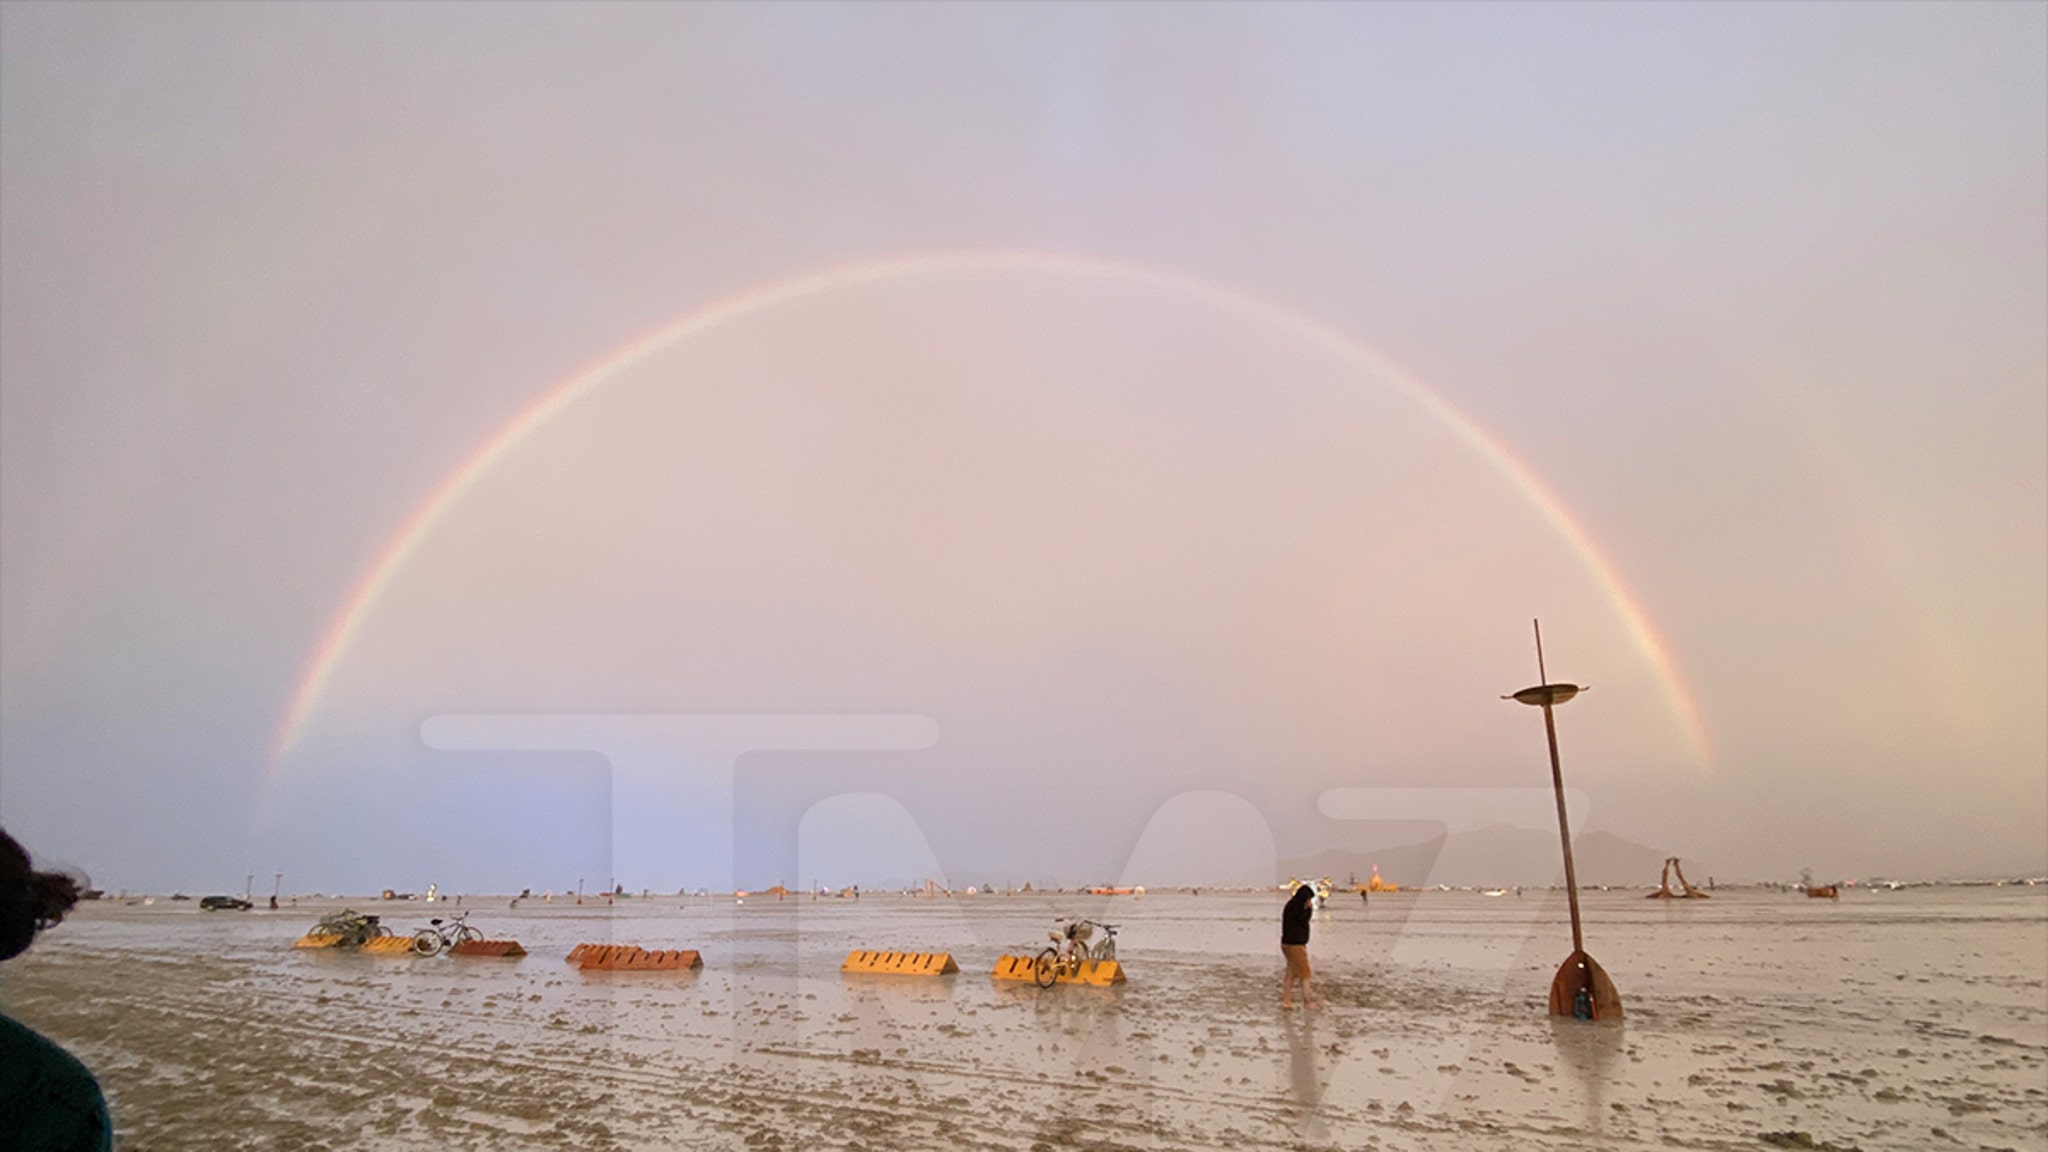 Burning Man Site Rained Out & Flooded, Festival Goers Trapped